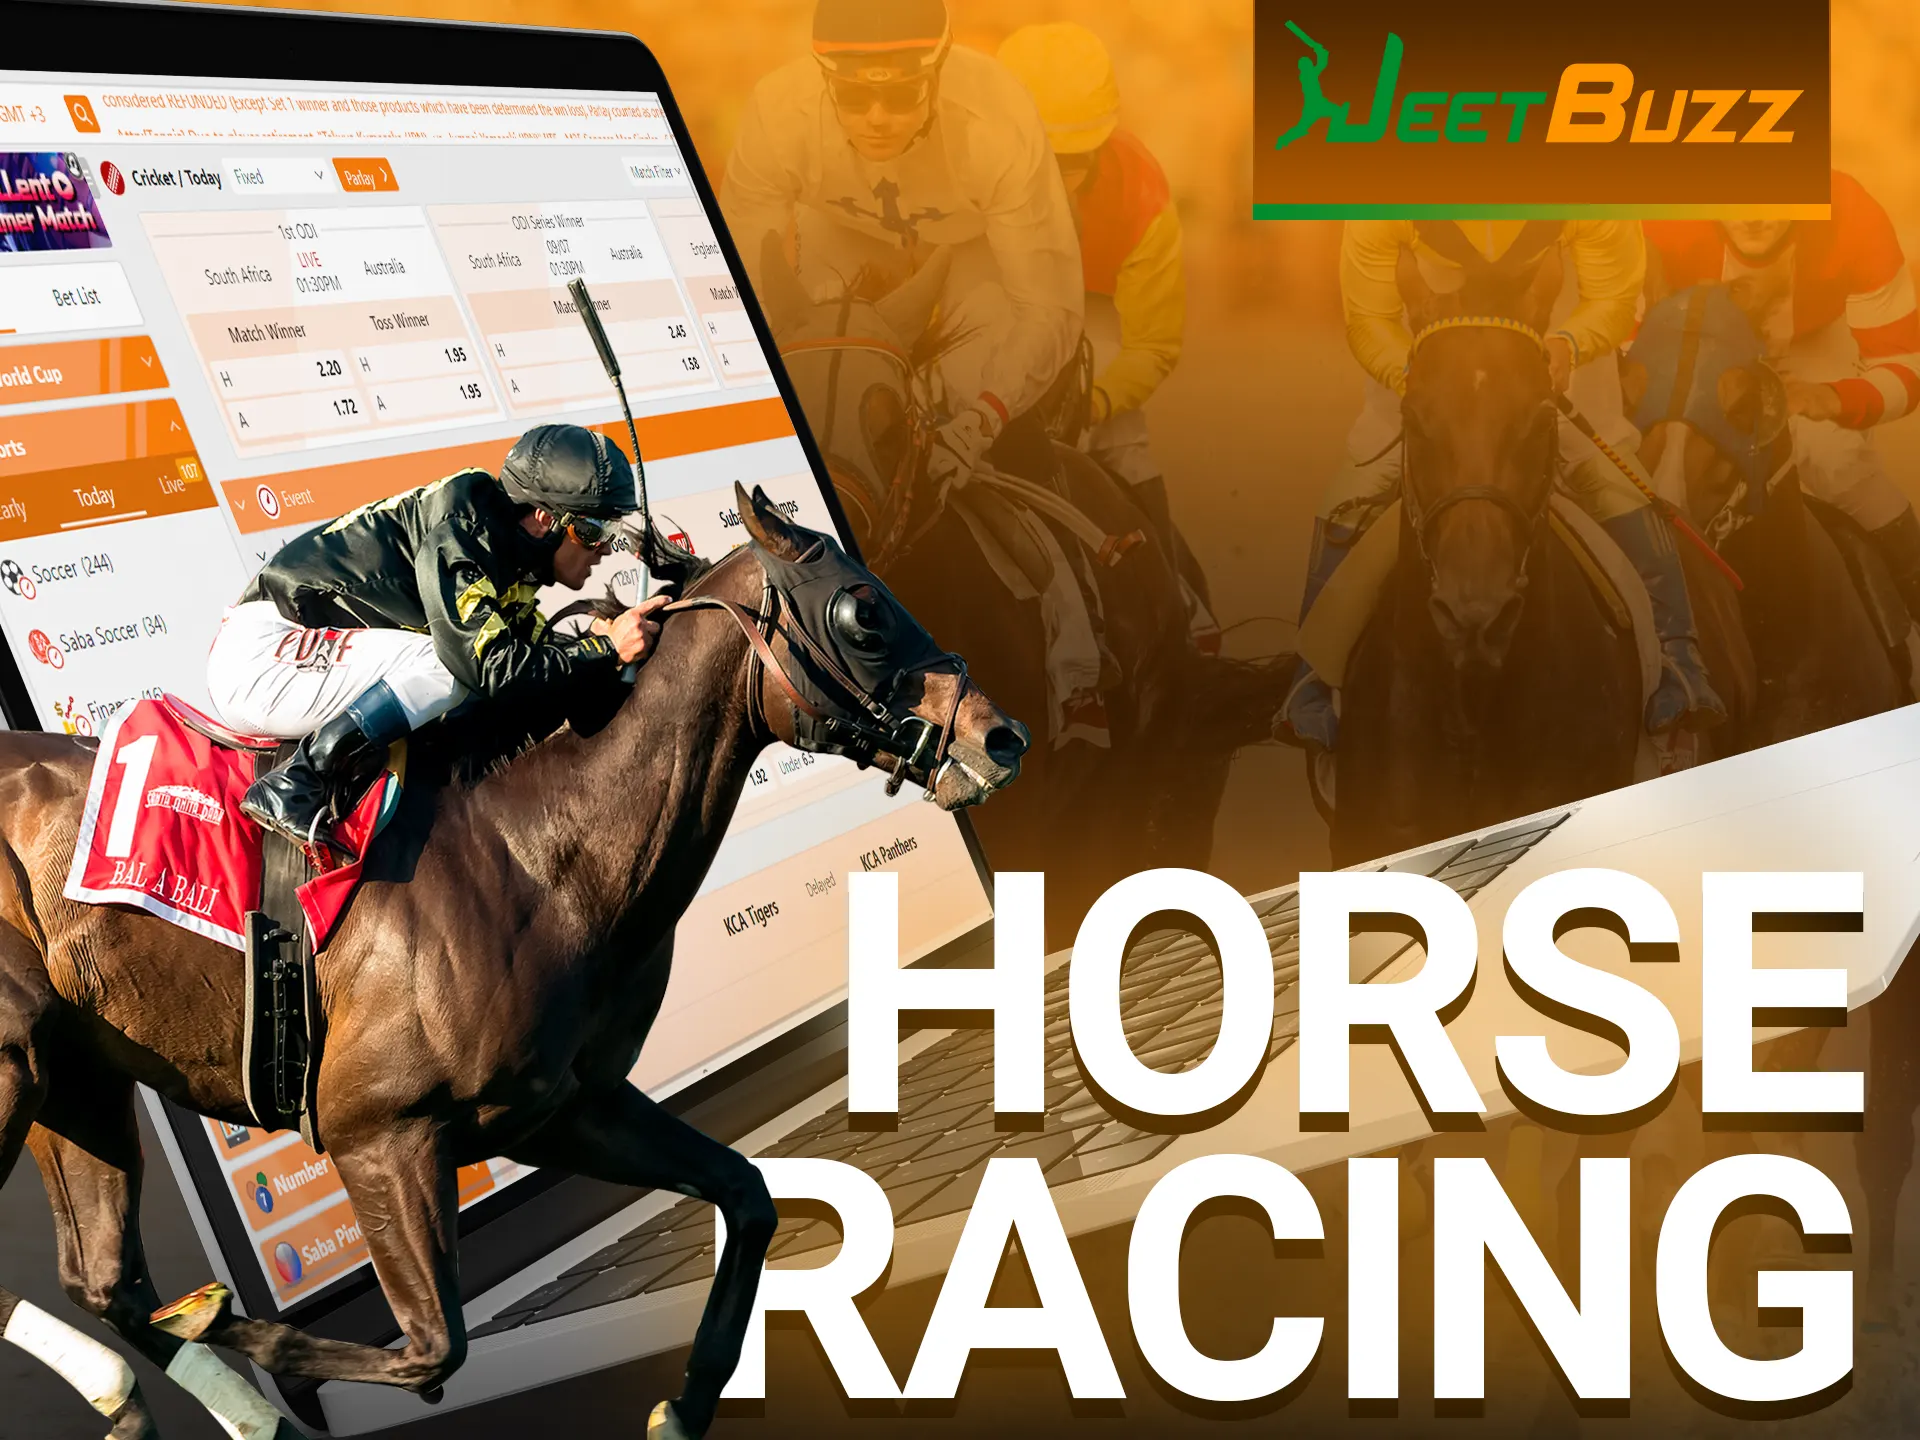 With Jeetbuzz, place bets on horse racing.